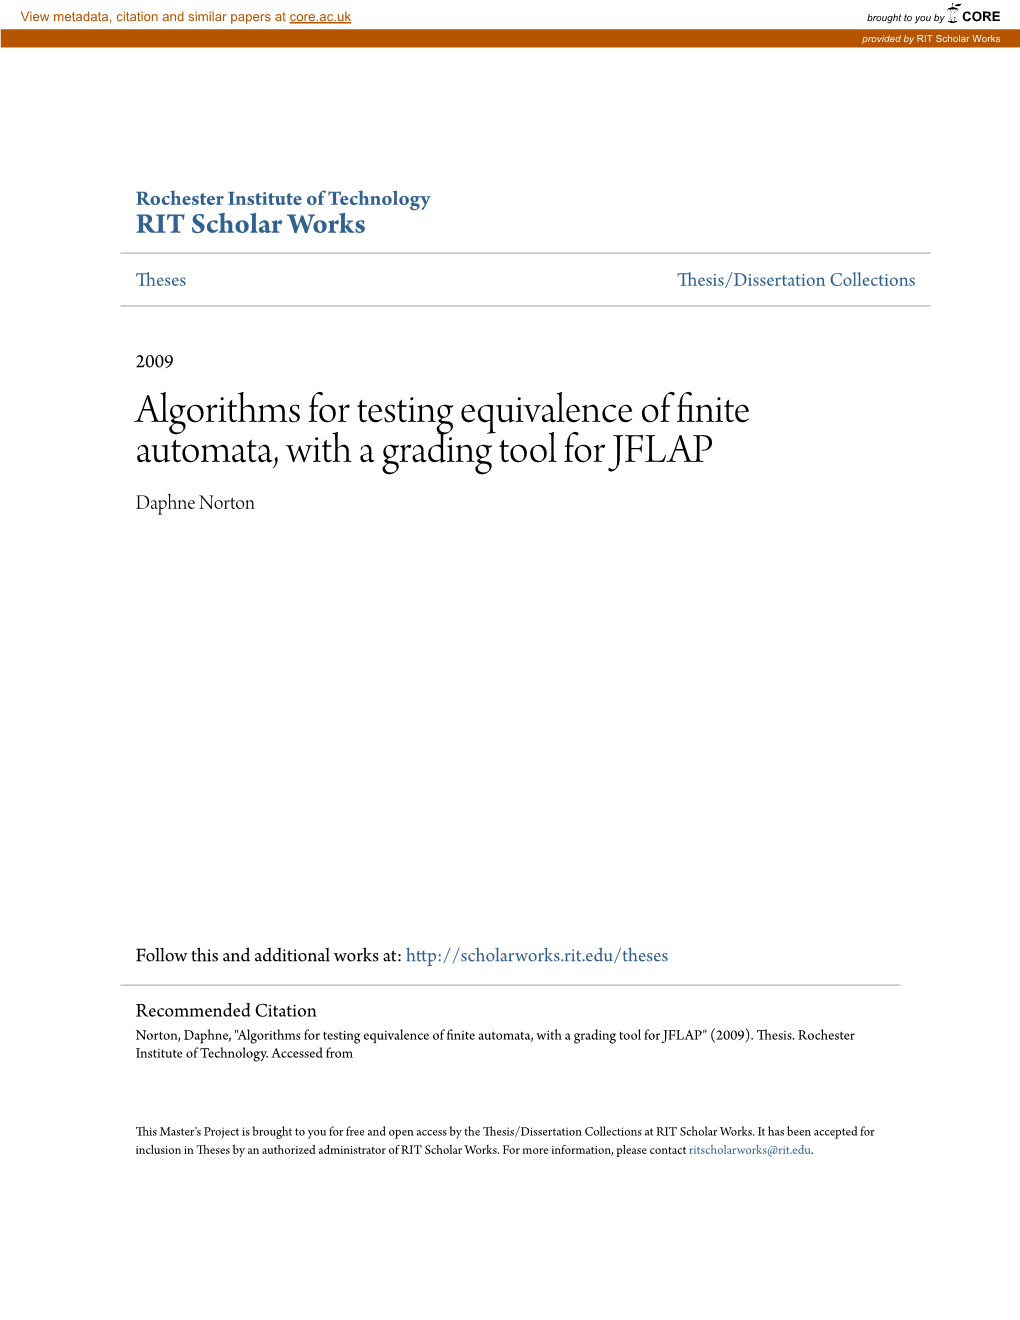 Algorithms for Testing Equivalence of Finite Automata, with a Grading Tool for JFLAP Daphne Norton